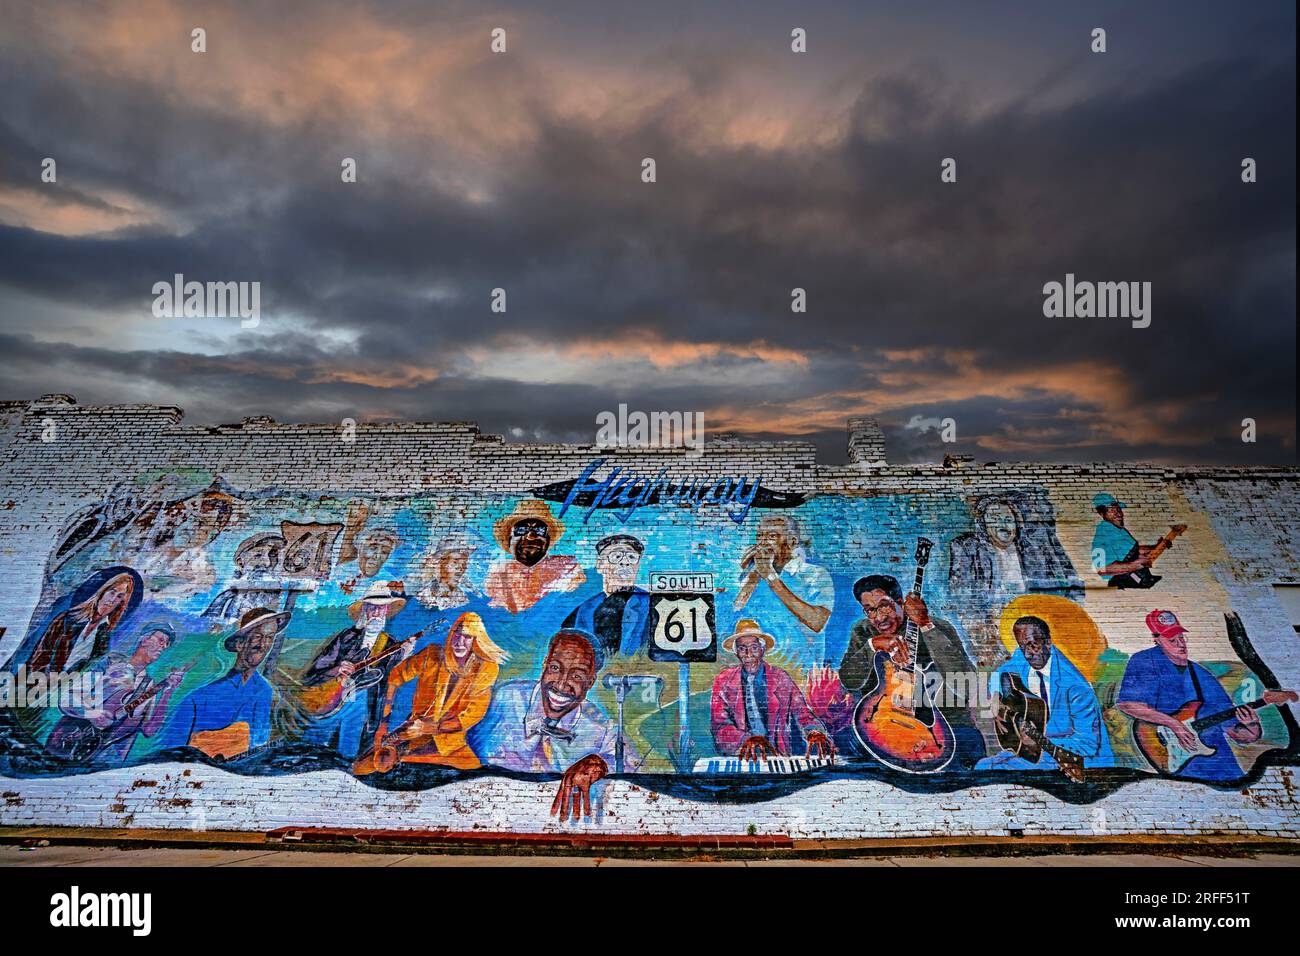 United States, Mississippi, Leland, mural on the theme of route 61, the route of the Blues Stock Photo